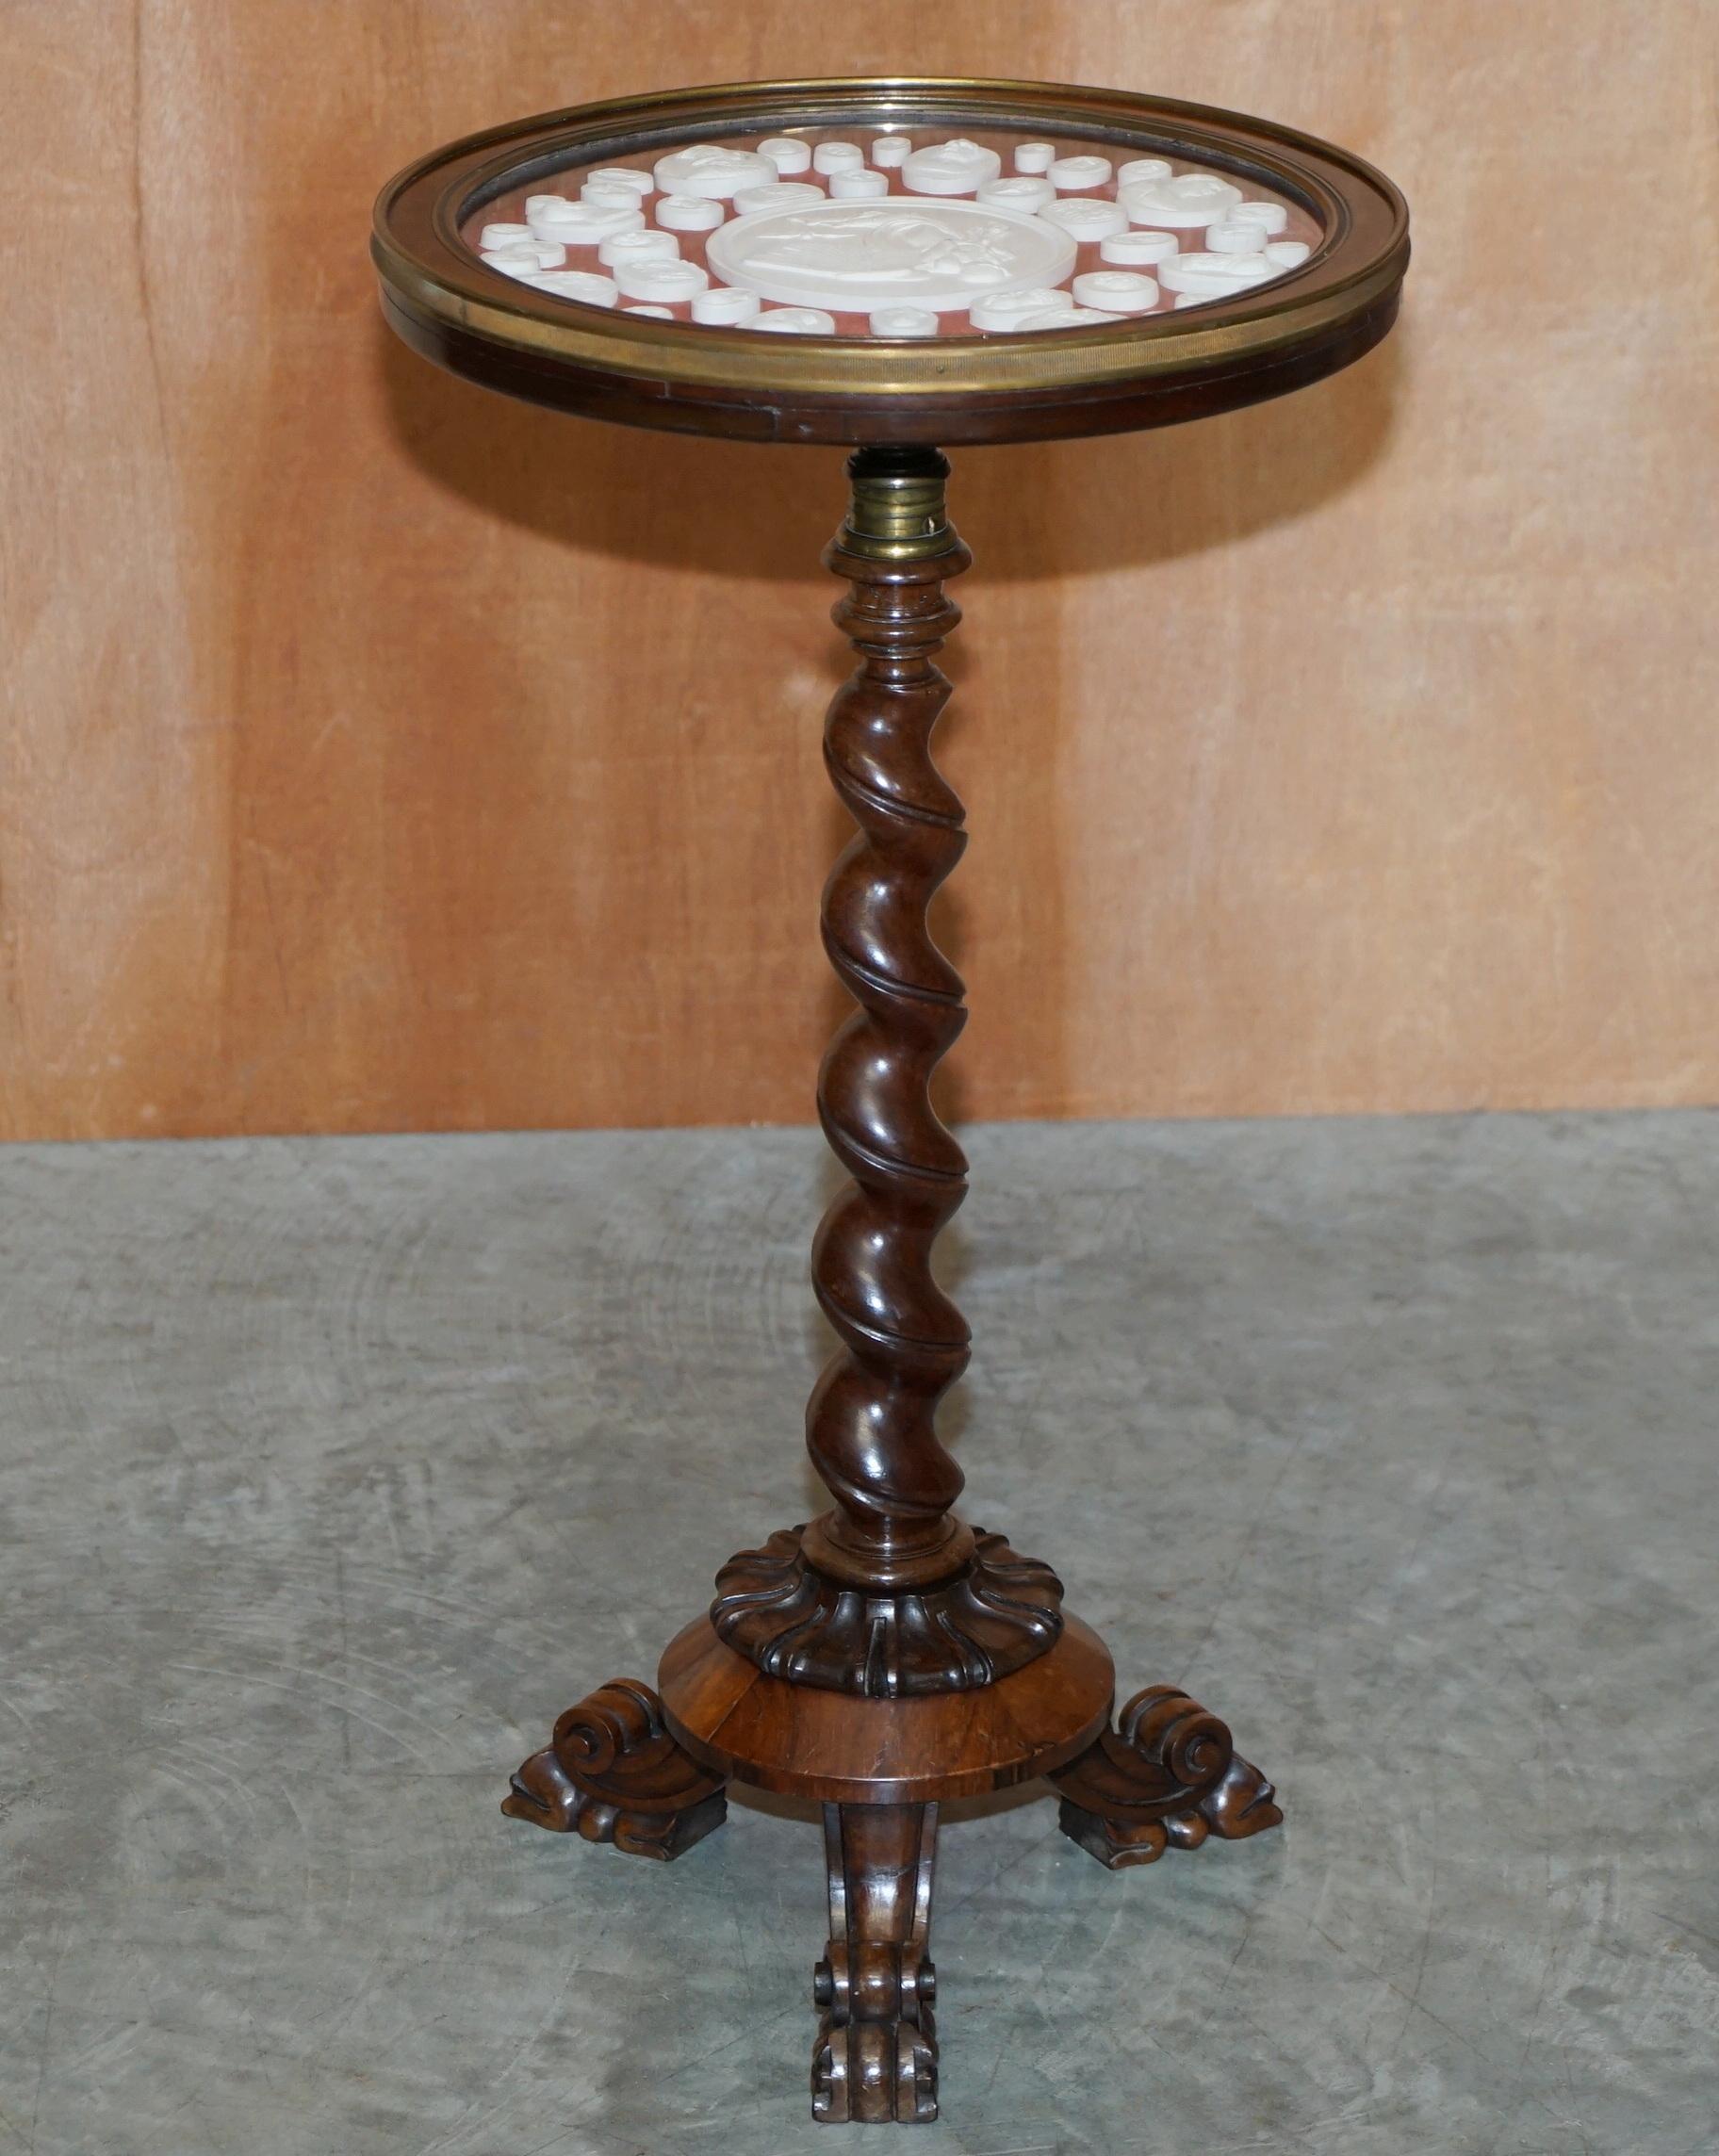 We are delighted to offer for sale this sublime William IV Hardwood occasional side table with display case top featuring Grand Tour Cameo’s 

A very rare and collectable table, if your in the market for this type of piece then this is the one for